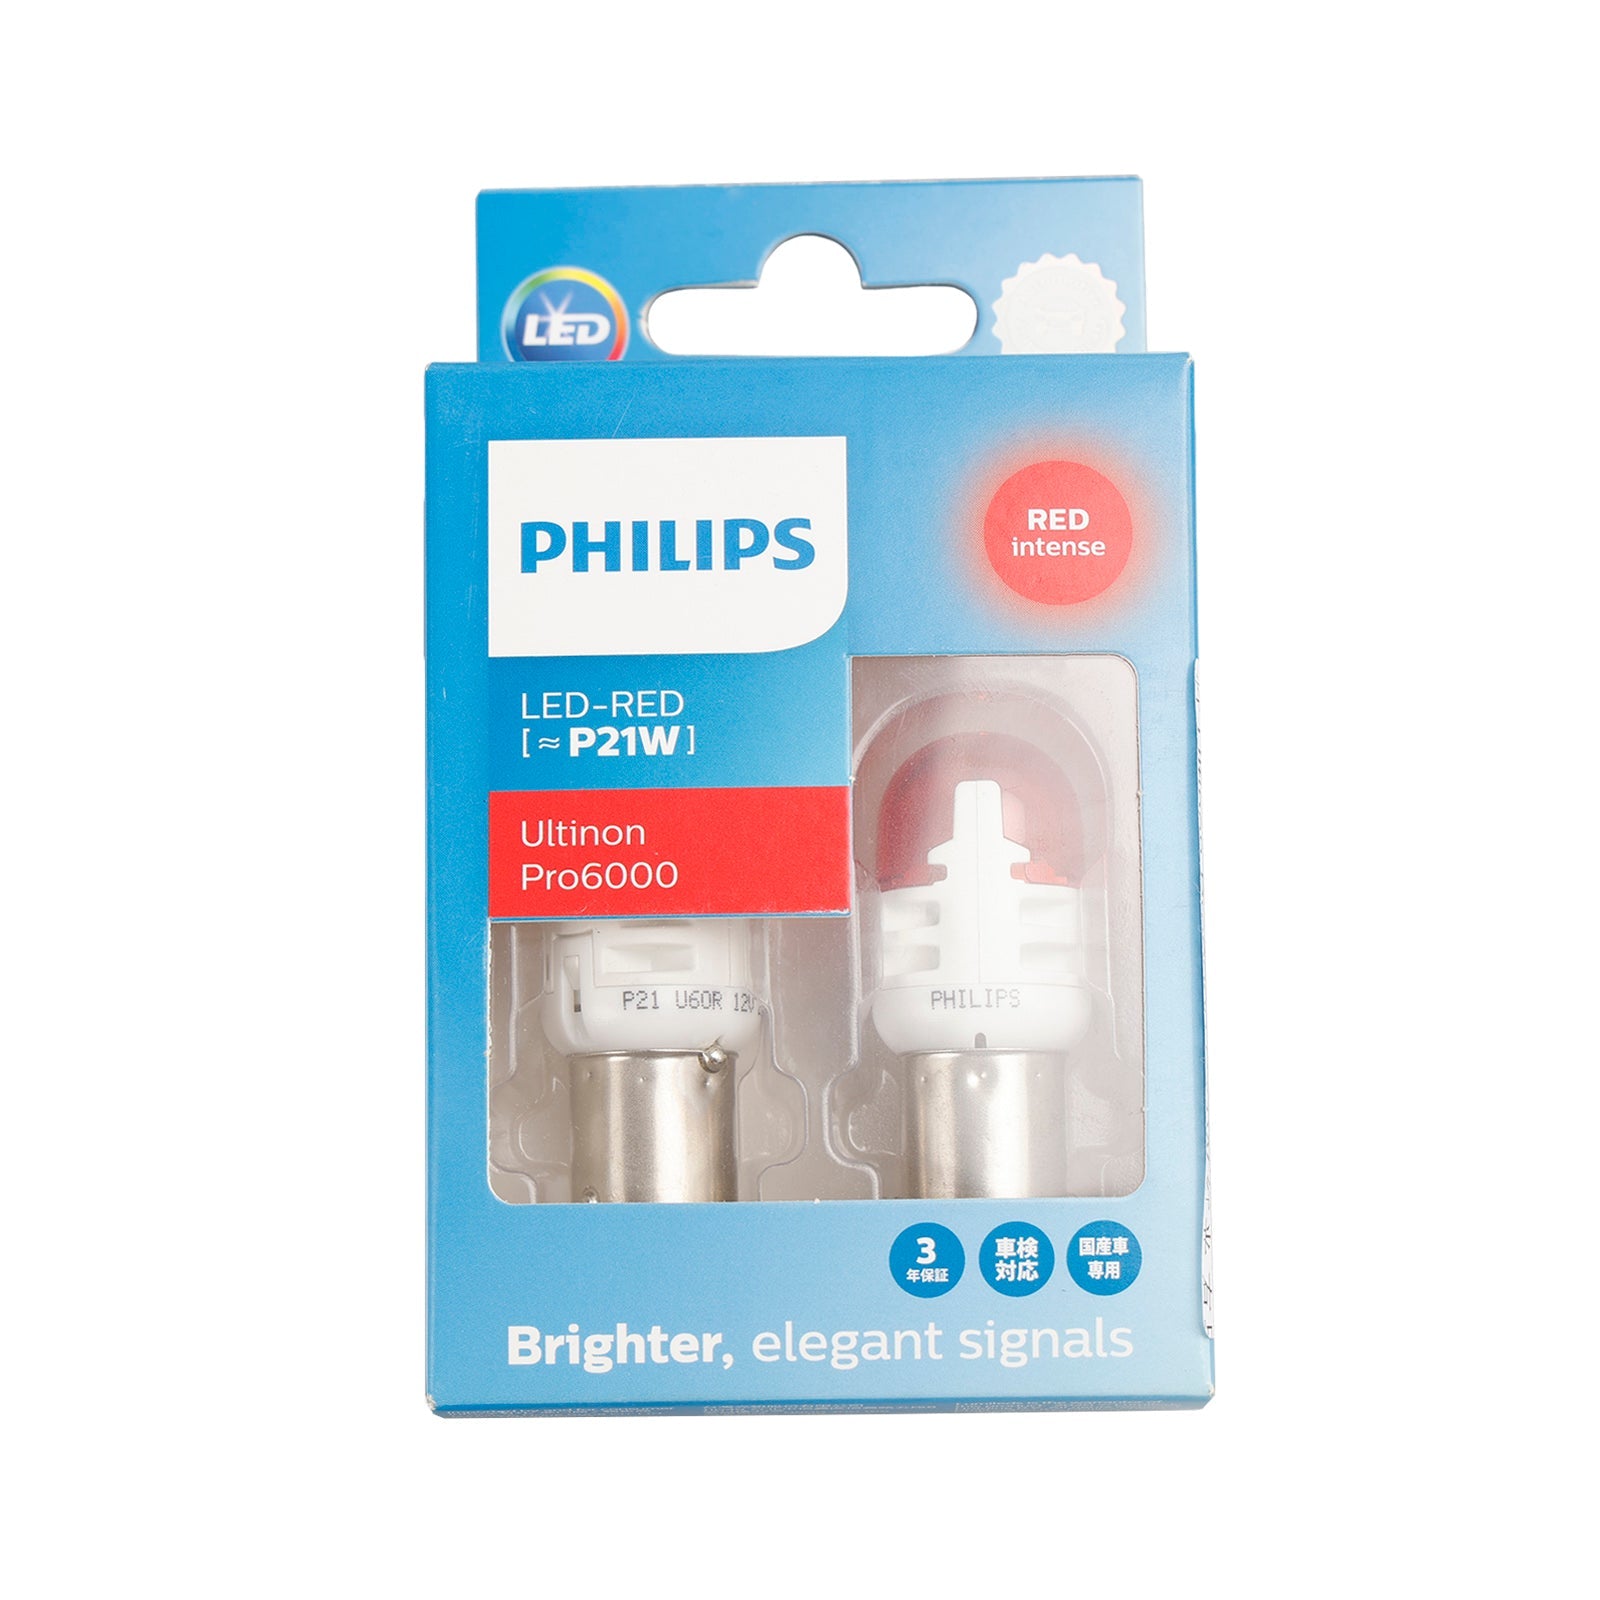 Pour Philips 11498RU60X2 Ultinon Pro6000 LED-ROUGE P21W Rouge intense 75lm